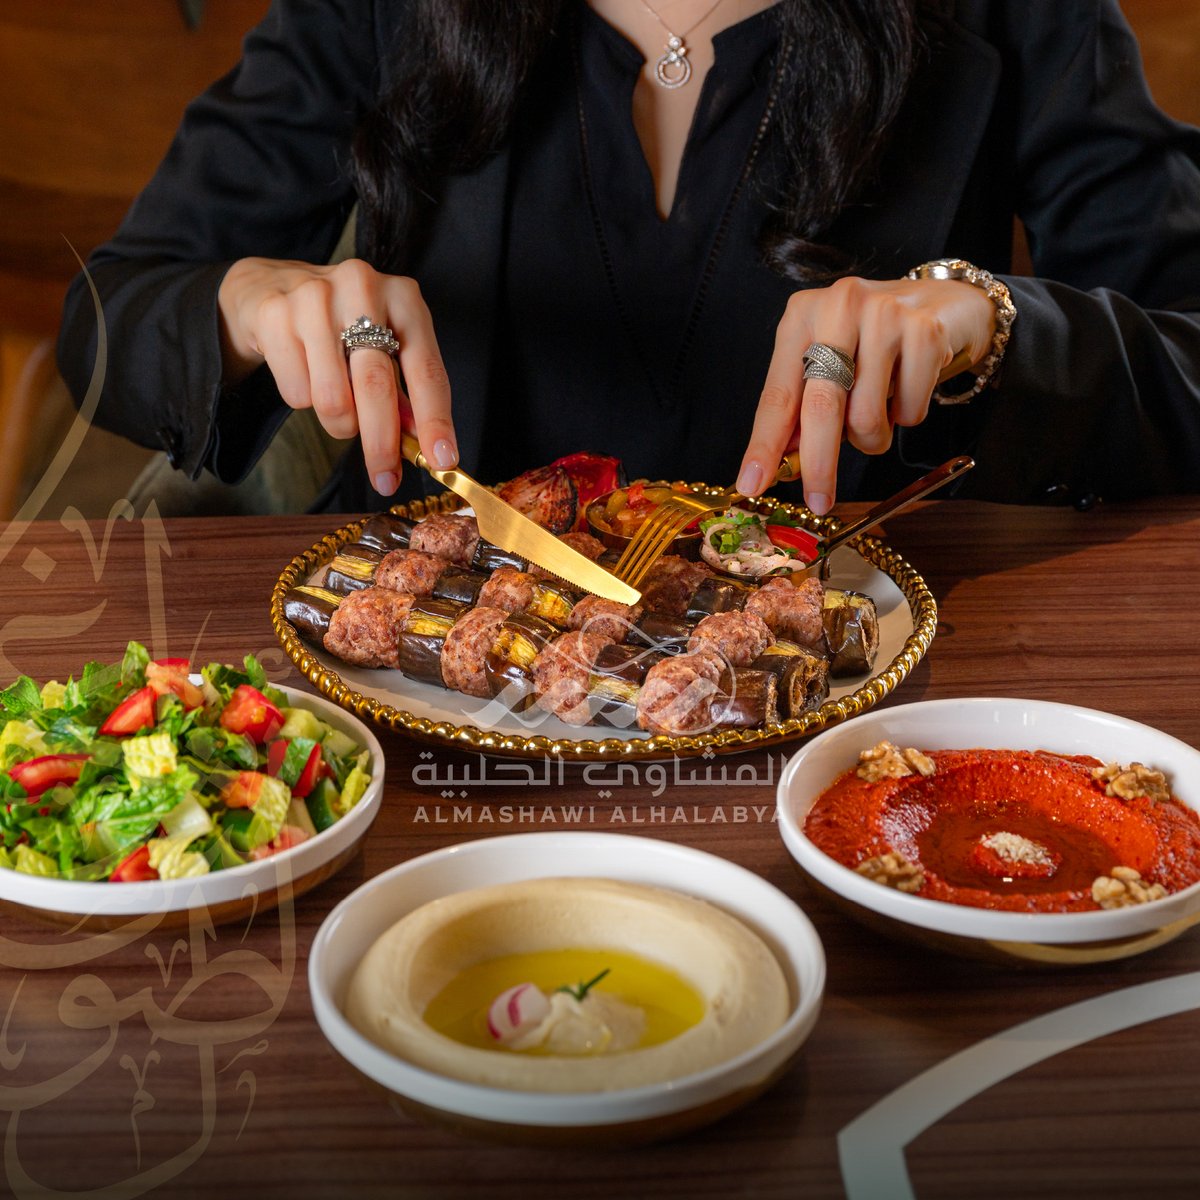 With dairy barbecue plates luxury meets fine taste!
Book your table now and enjoy an unforgettable dining experience.
#aleppogrills #almashawialhalabya #breakfast_buffet #ladiesnight #sunsetoffer #grills #restaurant #cafe #best #arabicfood #foodstagram #deleciousfood #eatfresh